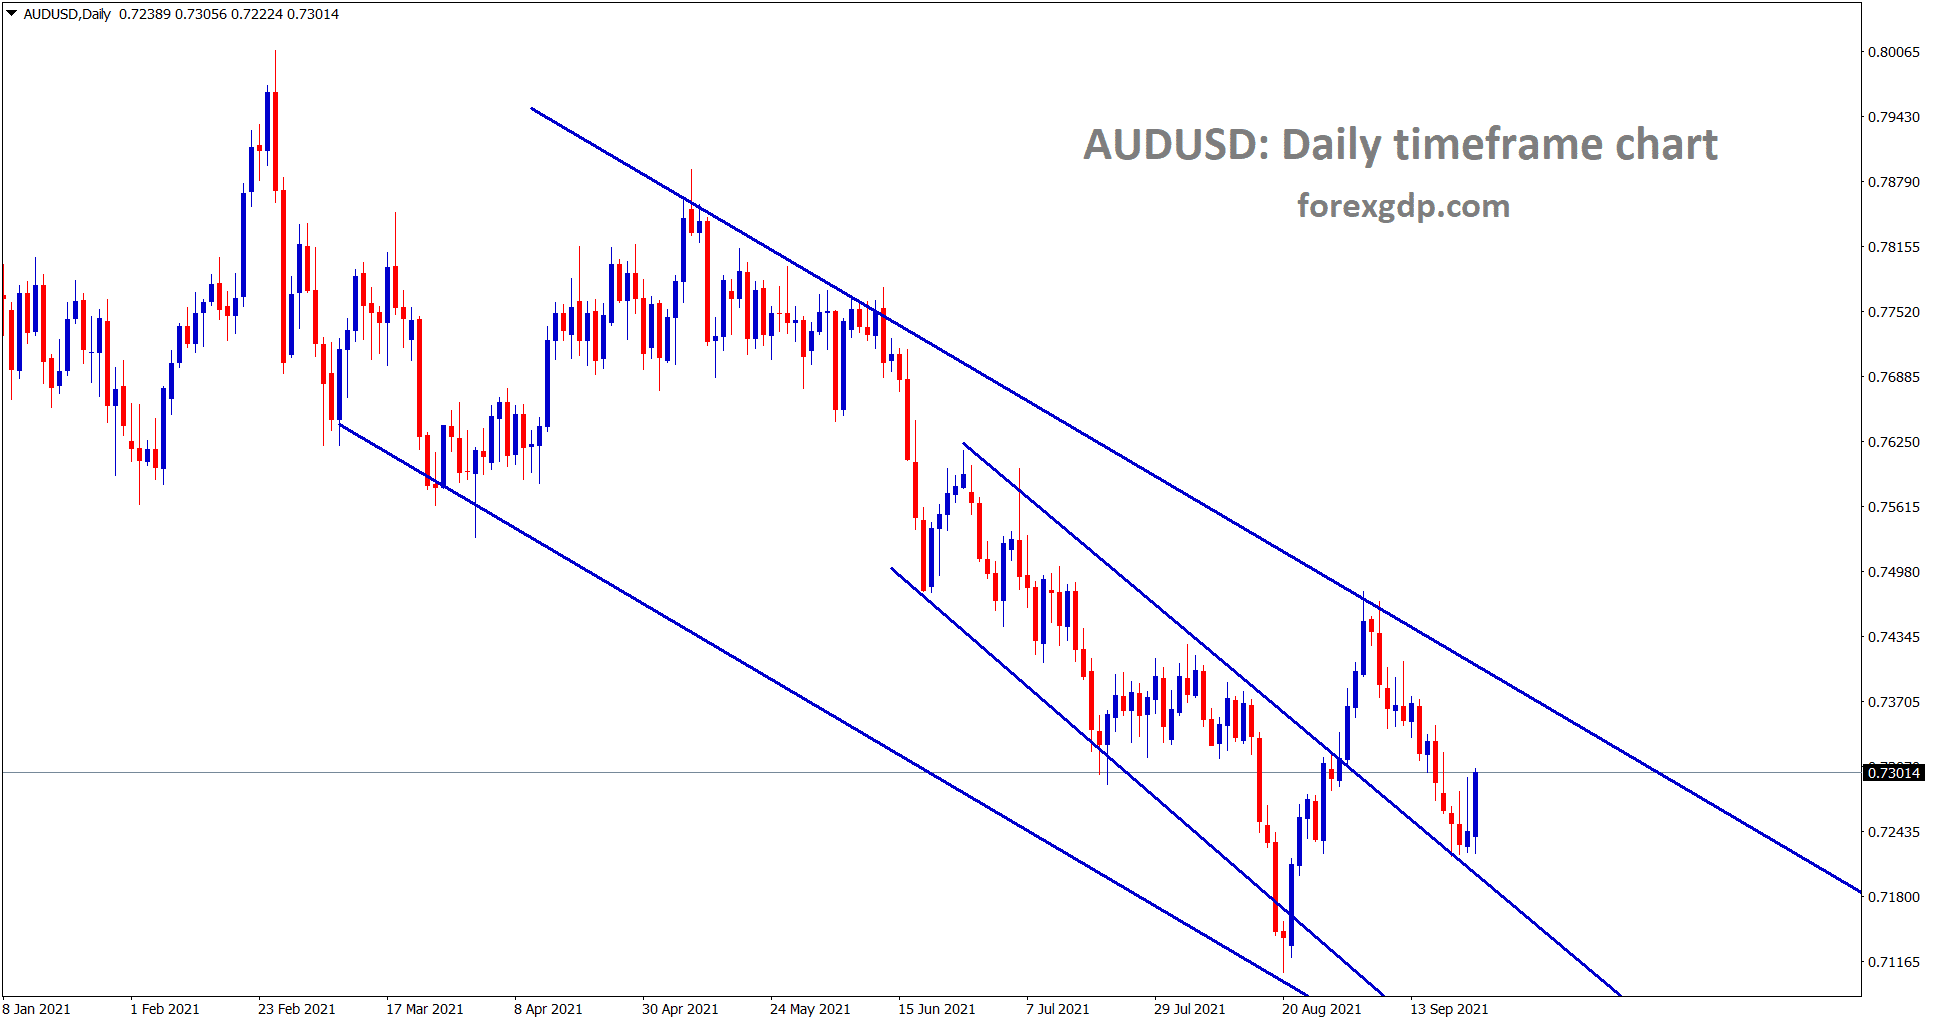 AUDUSD is rebounding from the minor channel retest zone